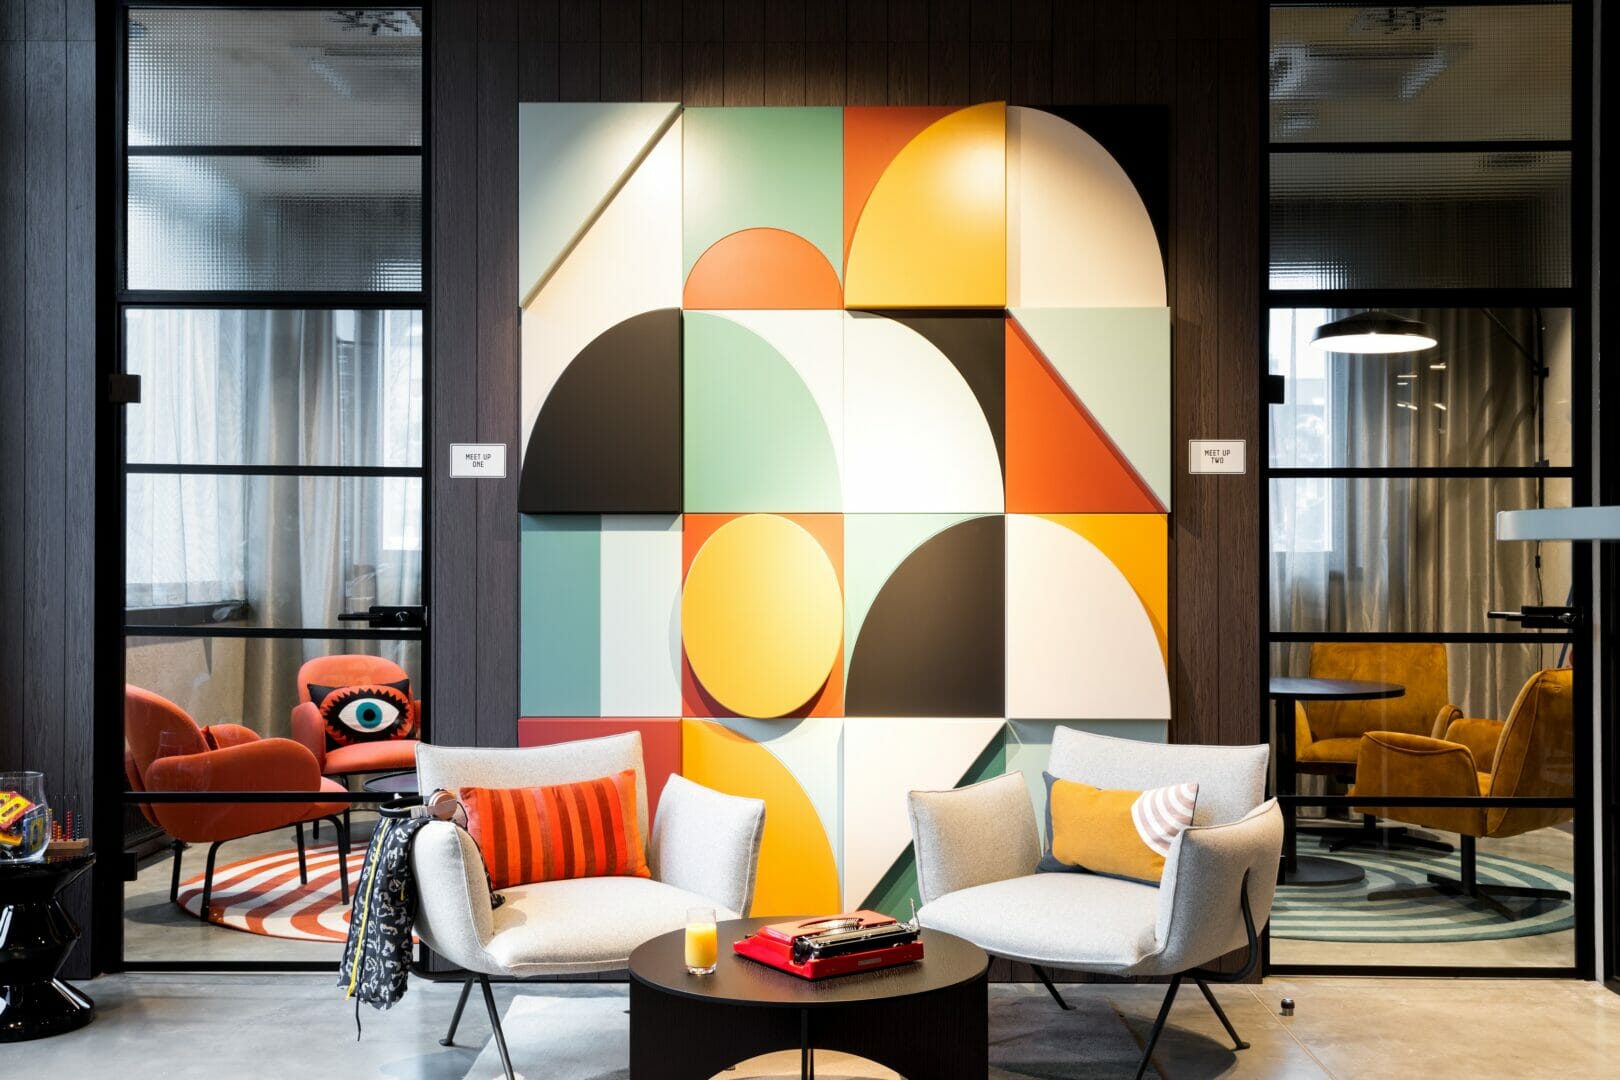 HOTEL CO 51 OPENS MARRIOTT INTERNATIONAL’S SECOND DUAL-BRAND PROPERTY IN GERMANY